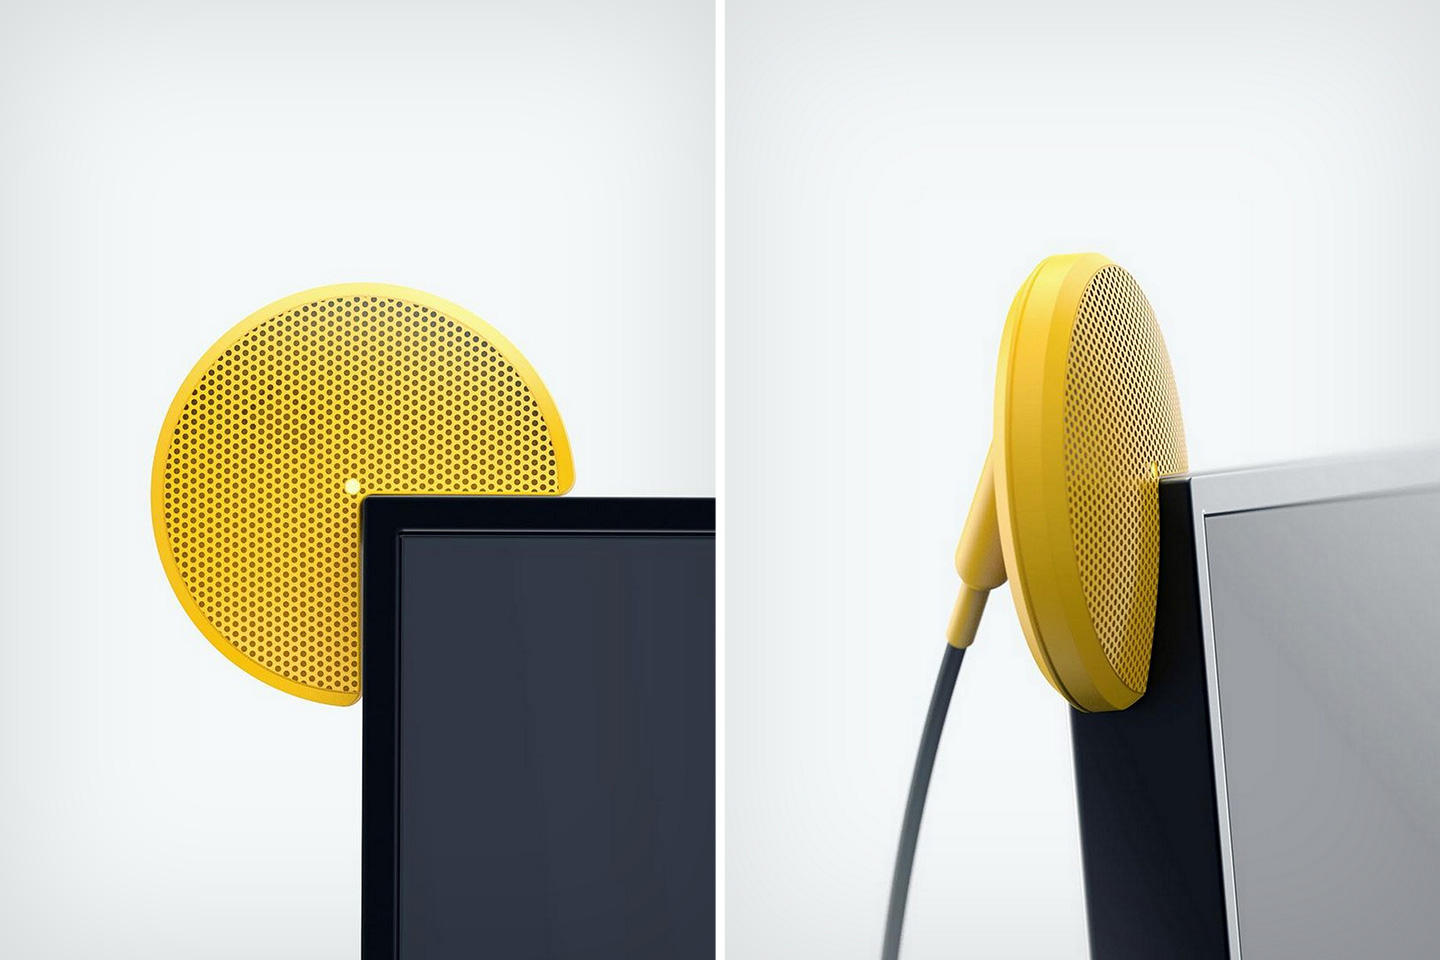 Pac-Man-inspired USB Mic rests snugly on the top corner of your desktop monitor